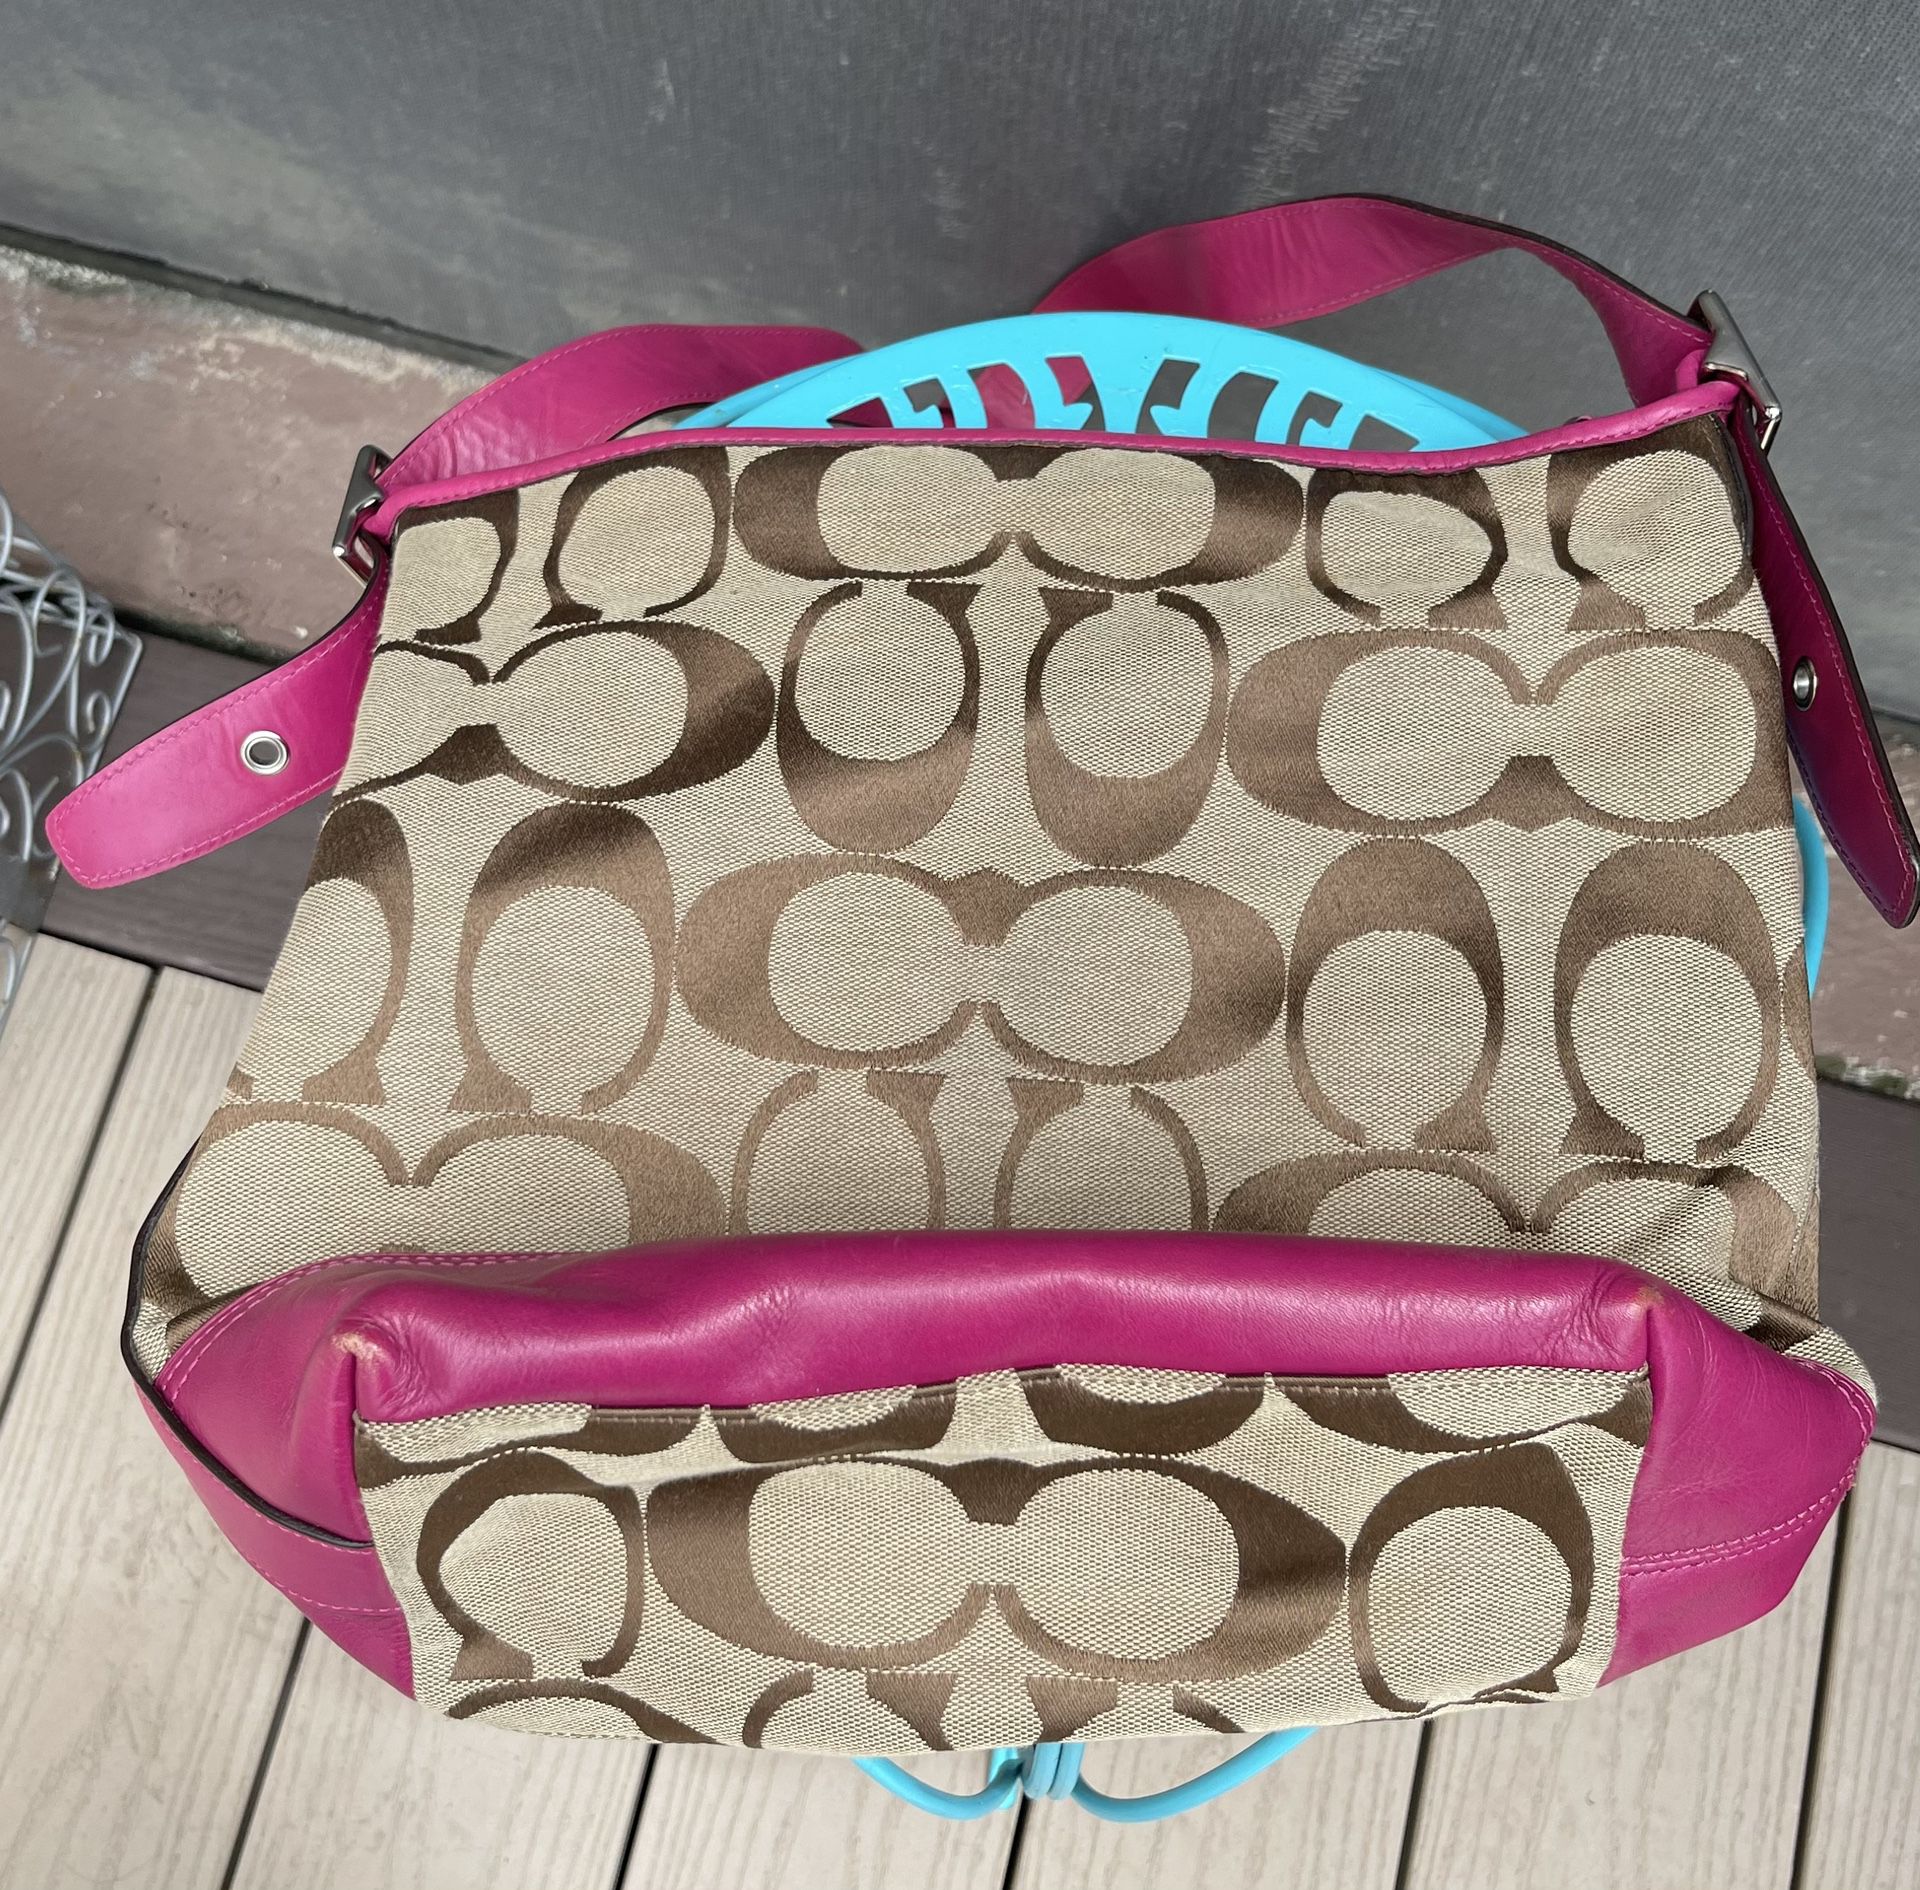 Coach Handbag With Hot Pink Trim for Sale in Boca Raton, FL